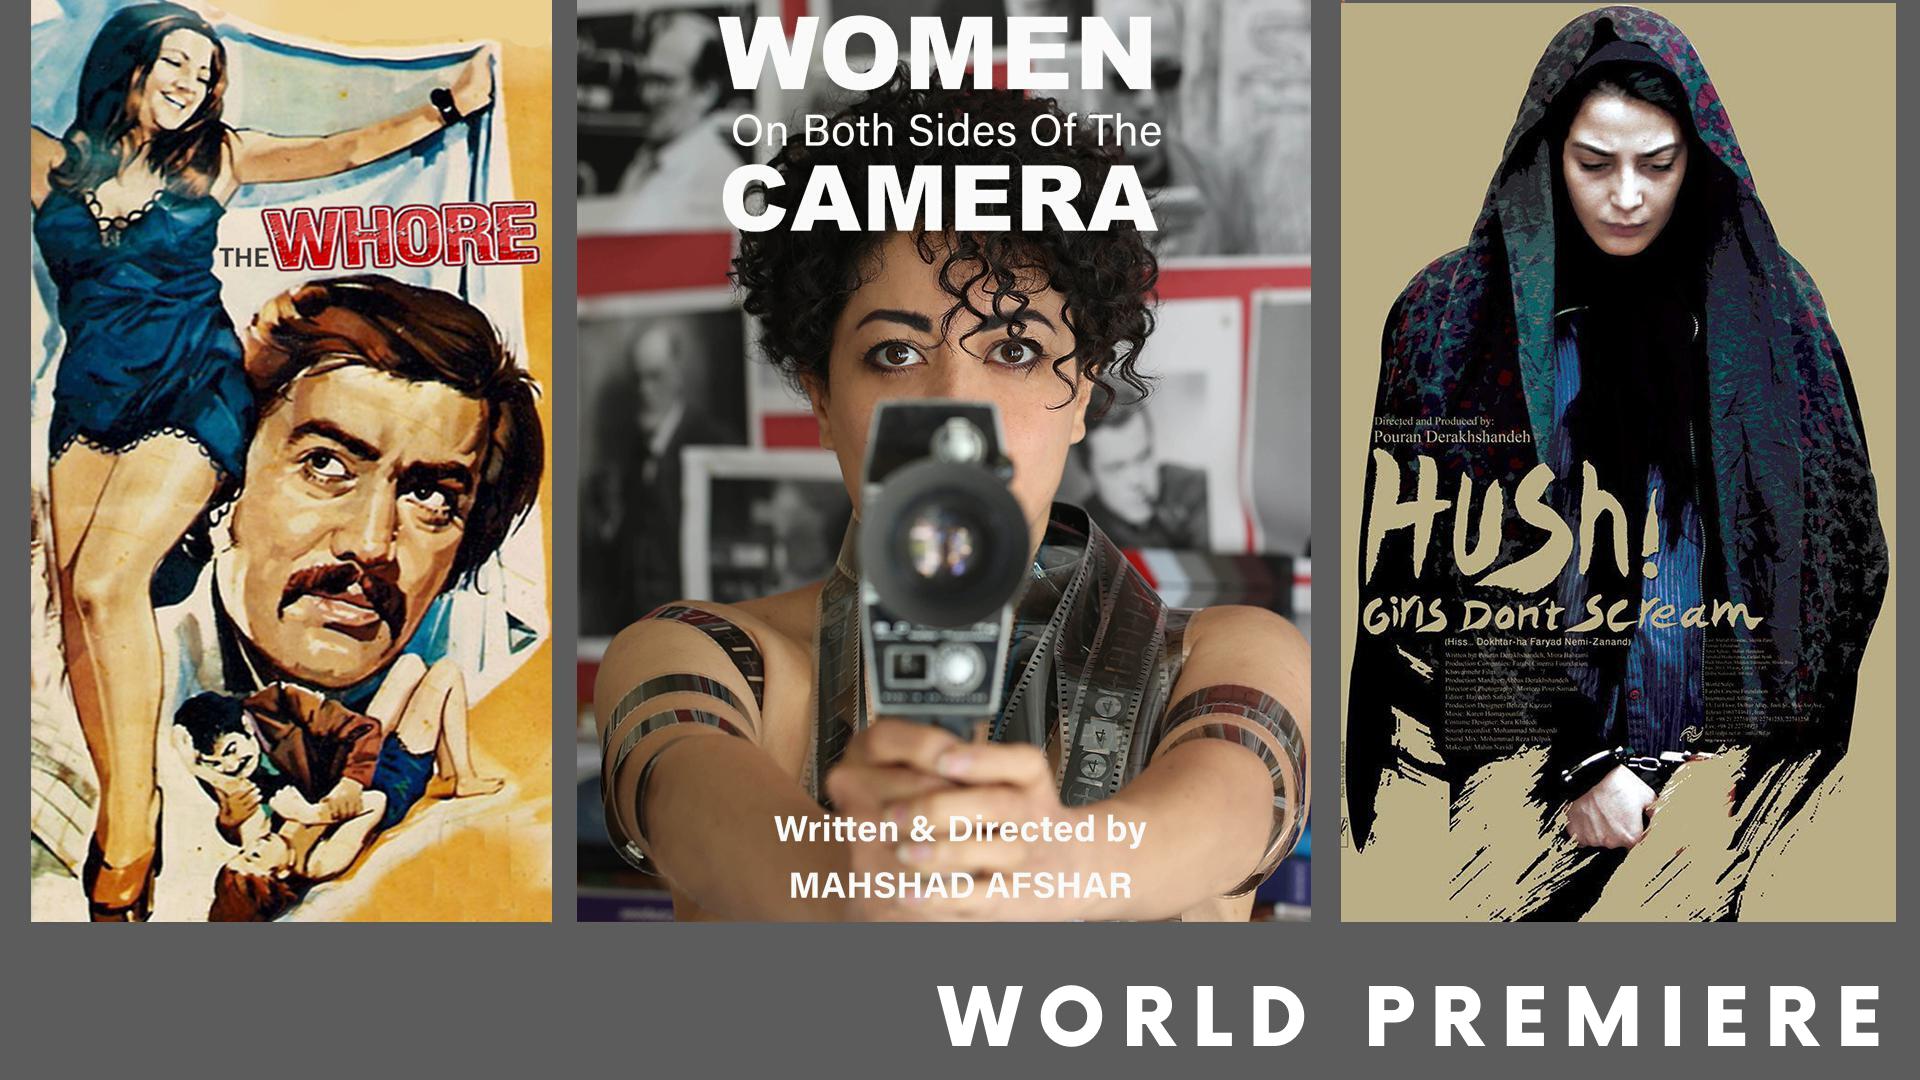 Women on Both Sides of the Camera (90 min)